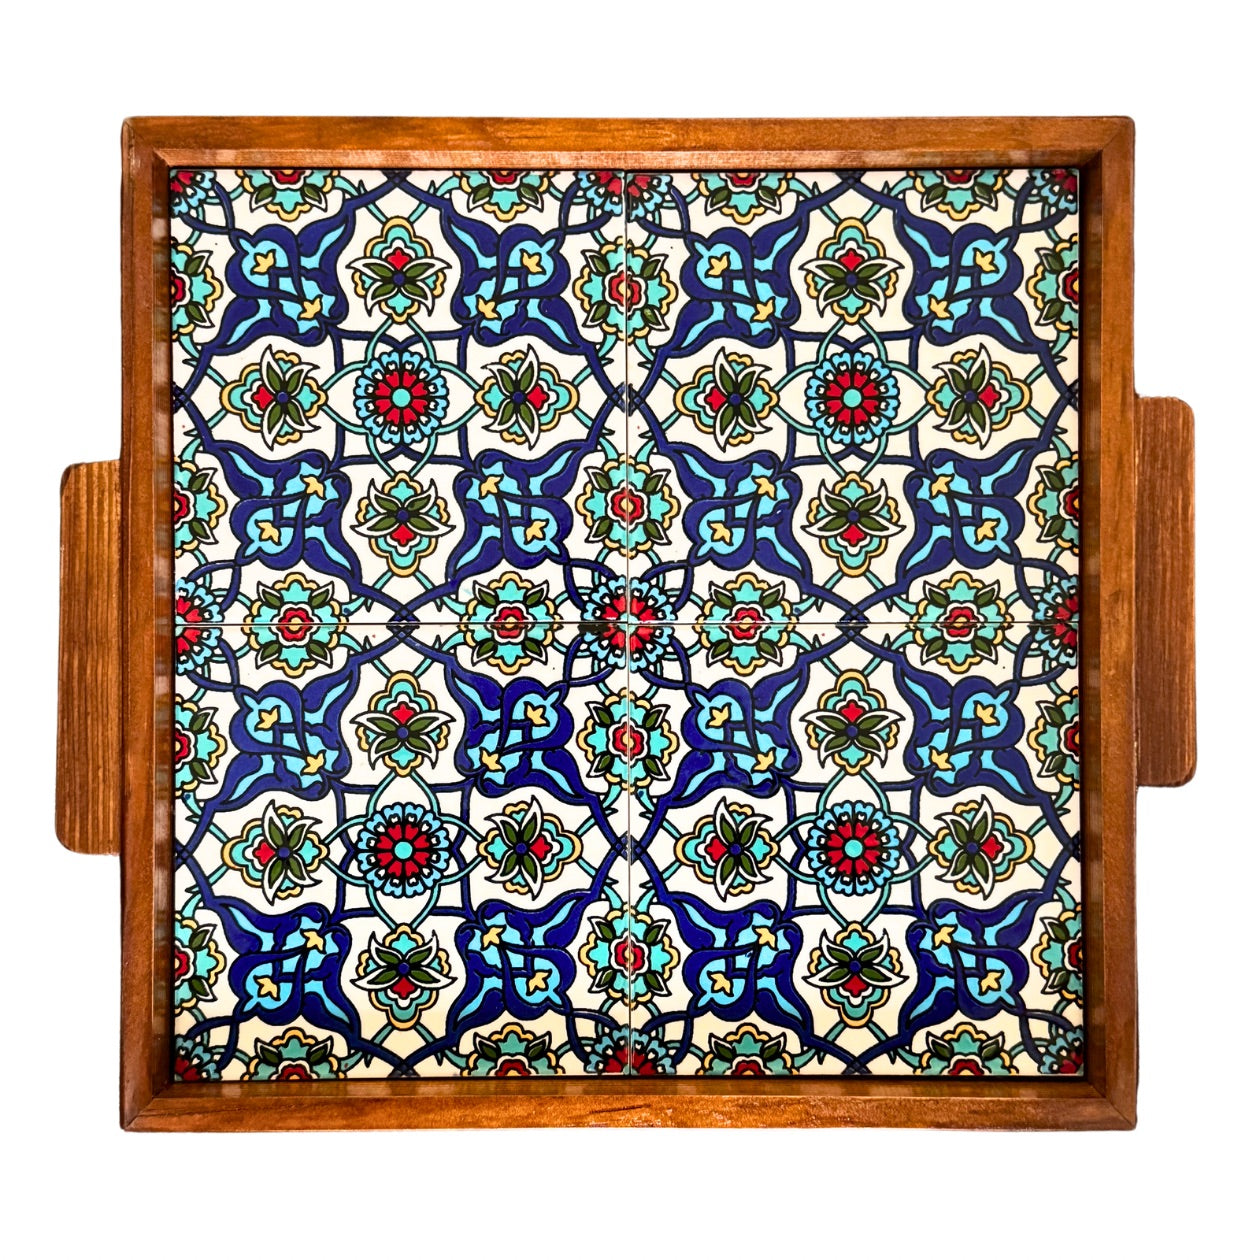 Ceramic and Wood Serving Tray